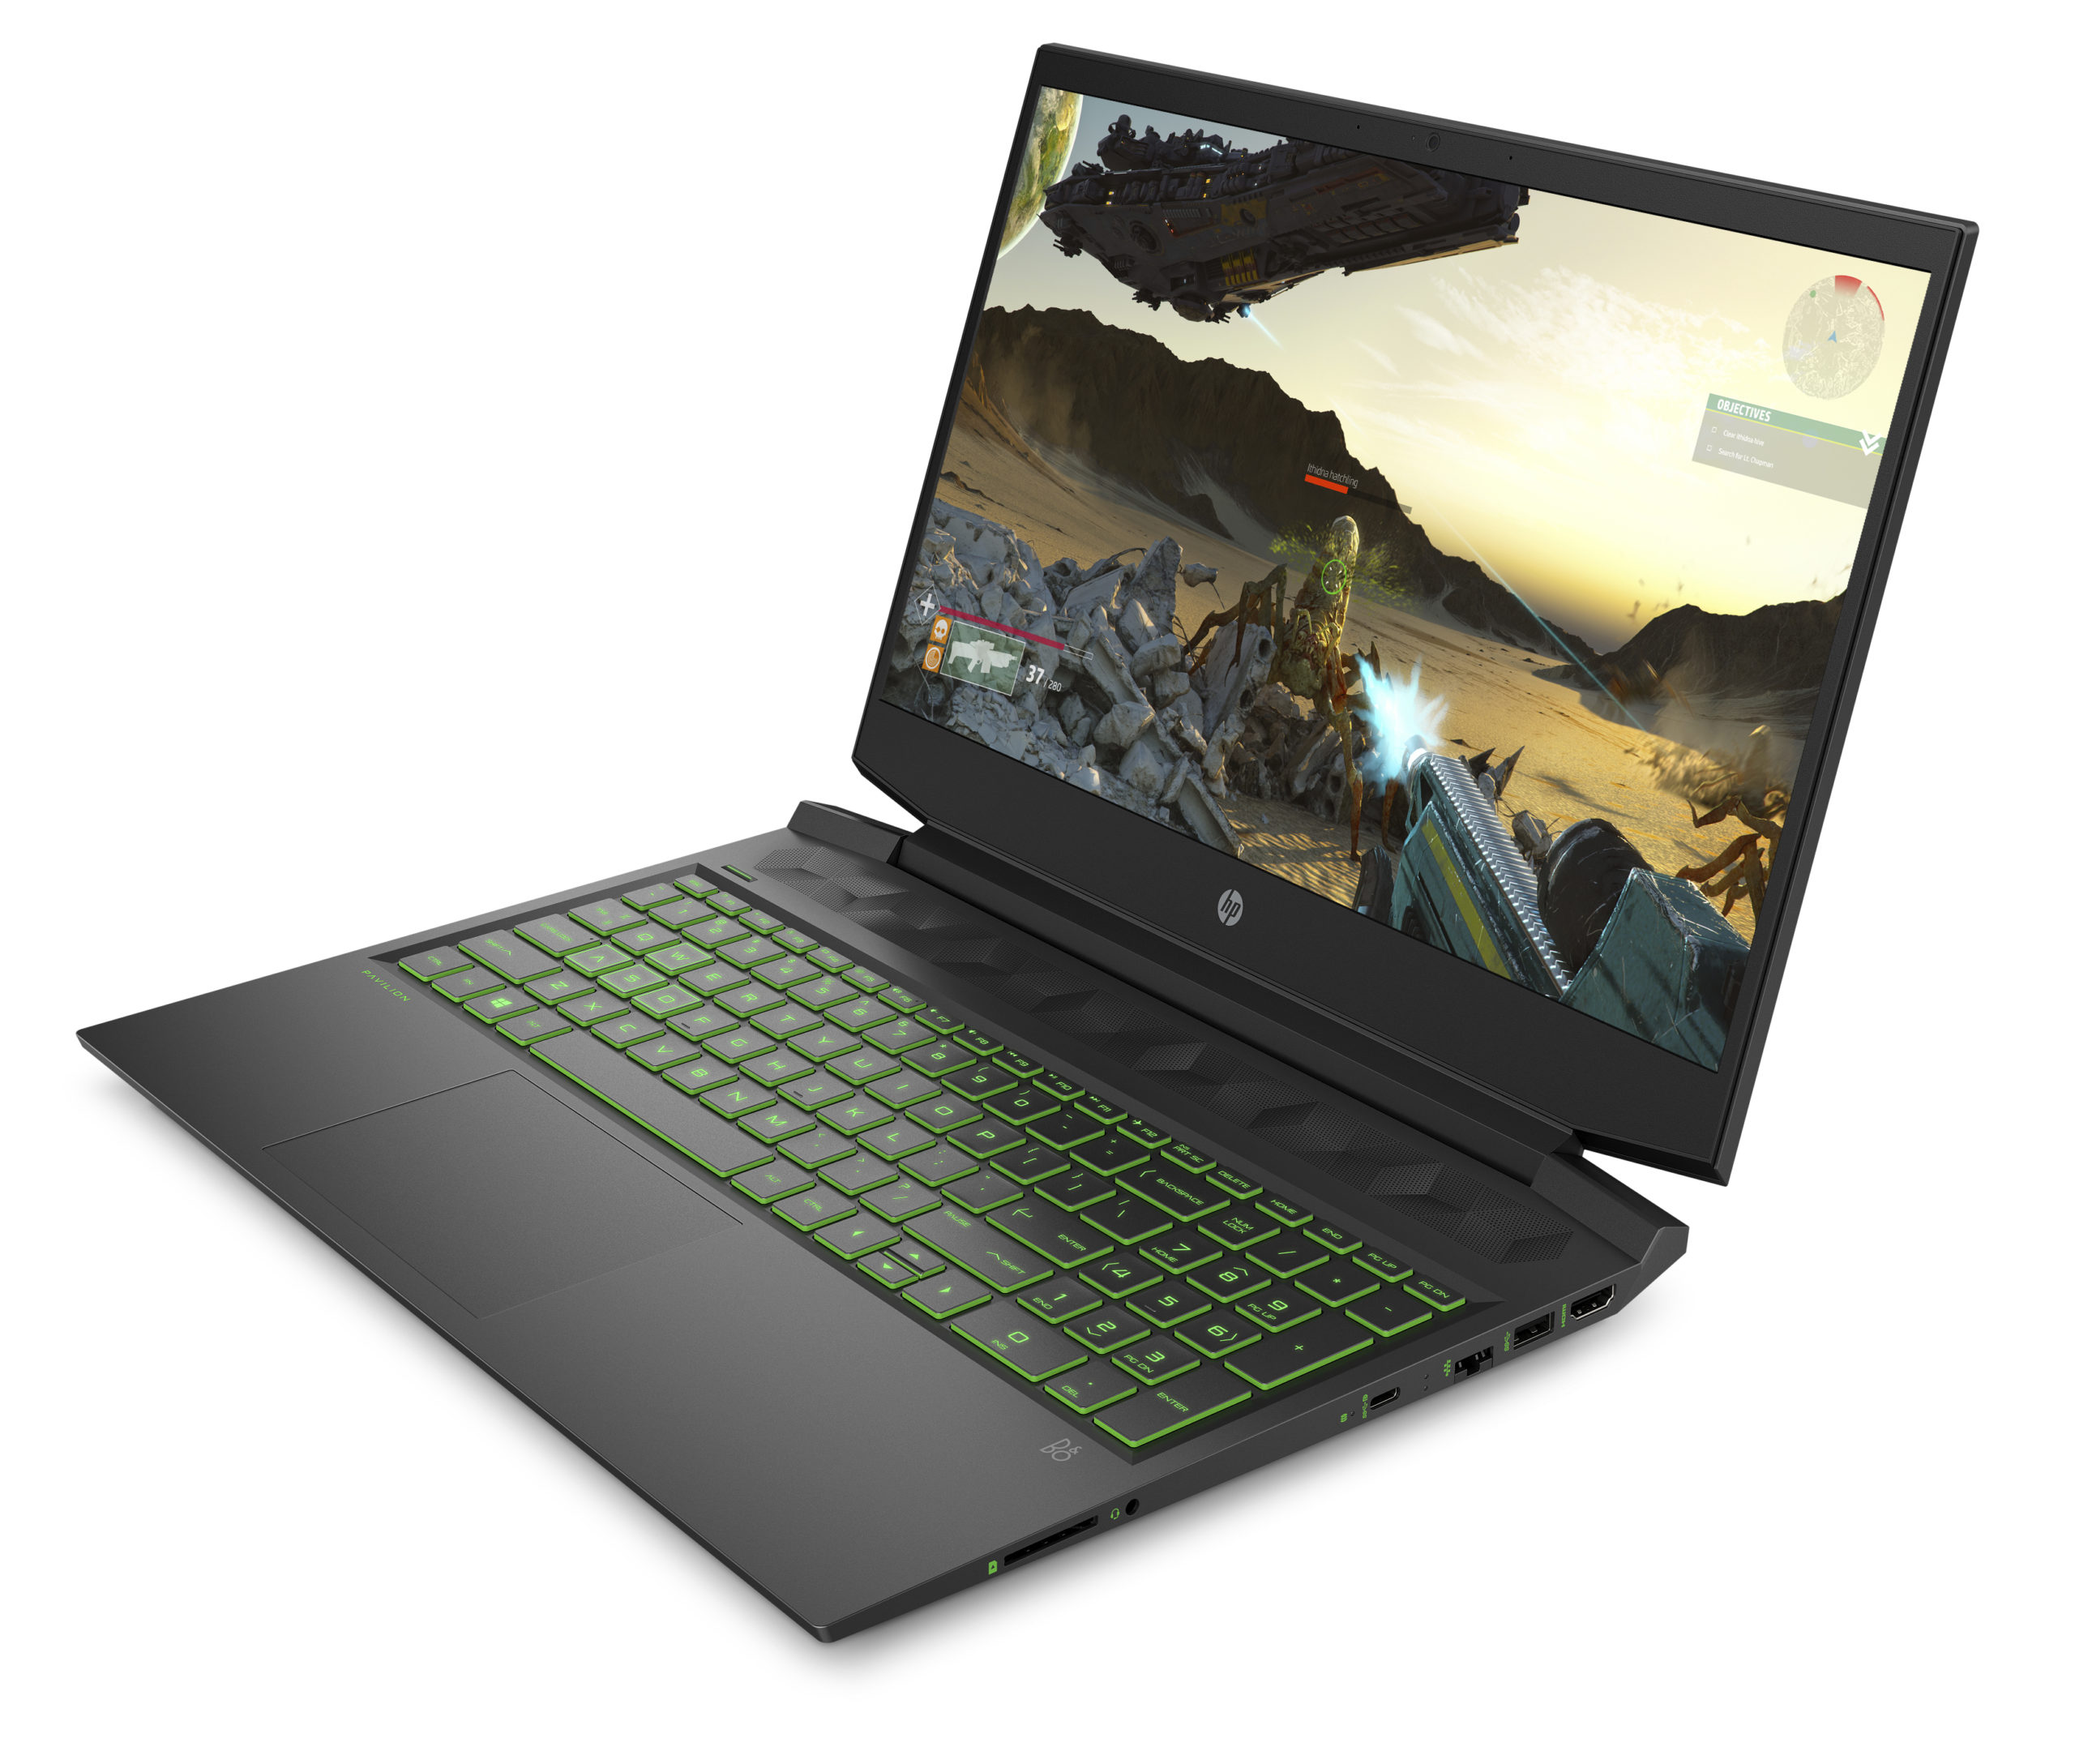 HP Pavilion Gaming 16 laptop, open and facing left, showing keyboard lit in green and game on screen